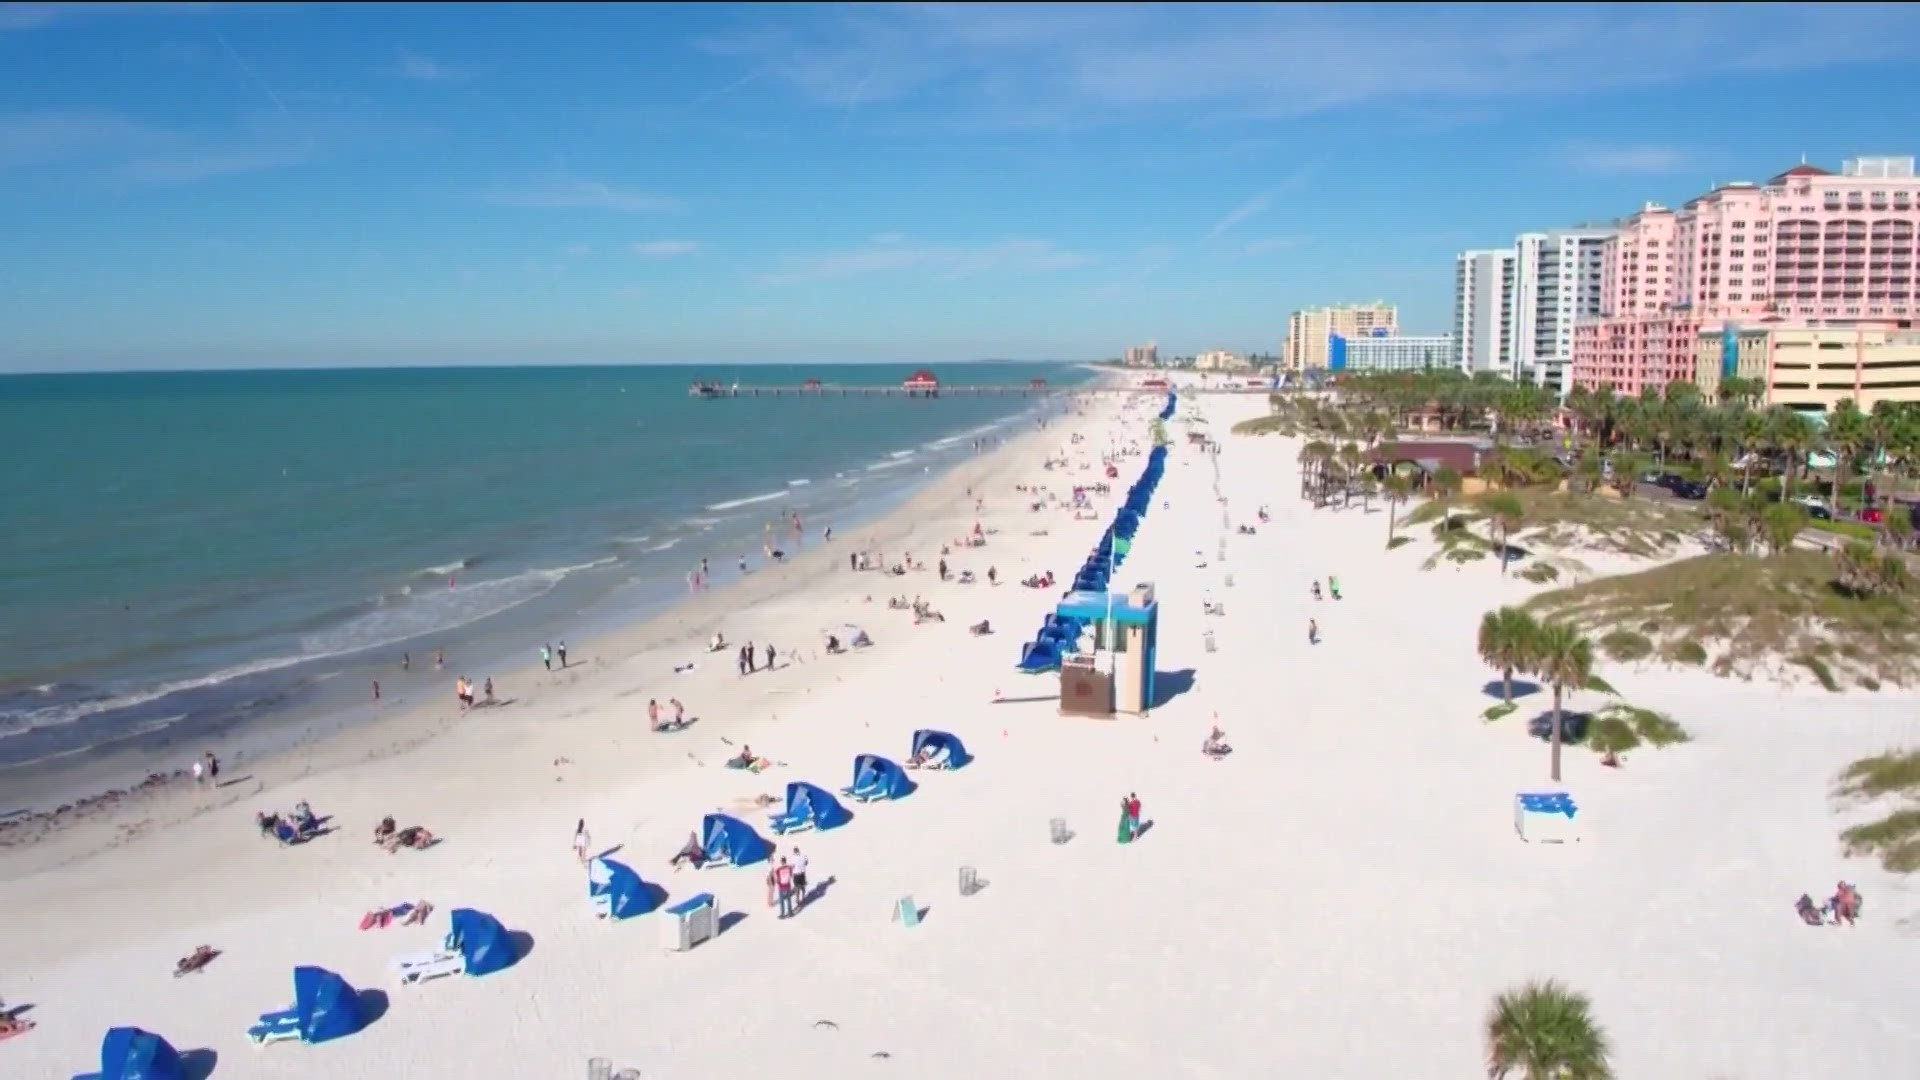 Saving money on spring break can be a challenge but it's possible if you plan ahead.